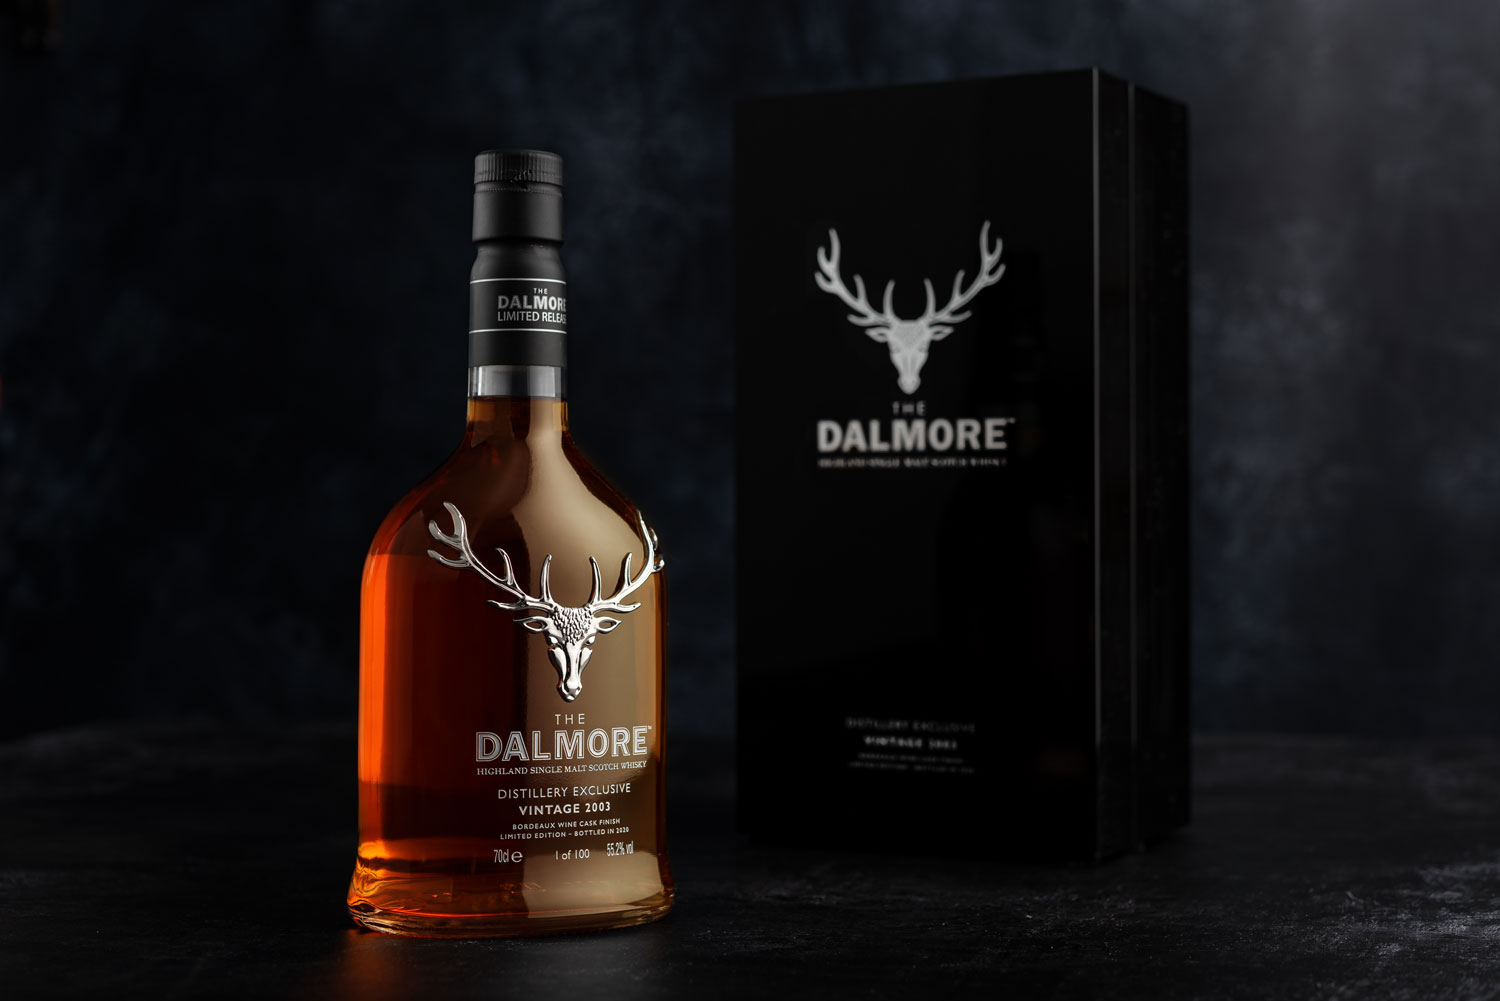 The Dalmore Partners With Harrods For Sale Of Distillery Exclusives